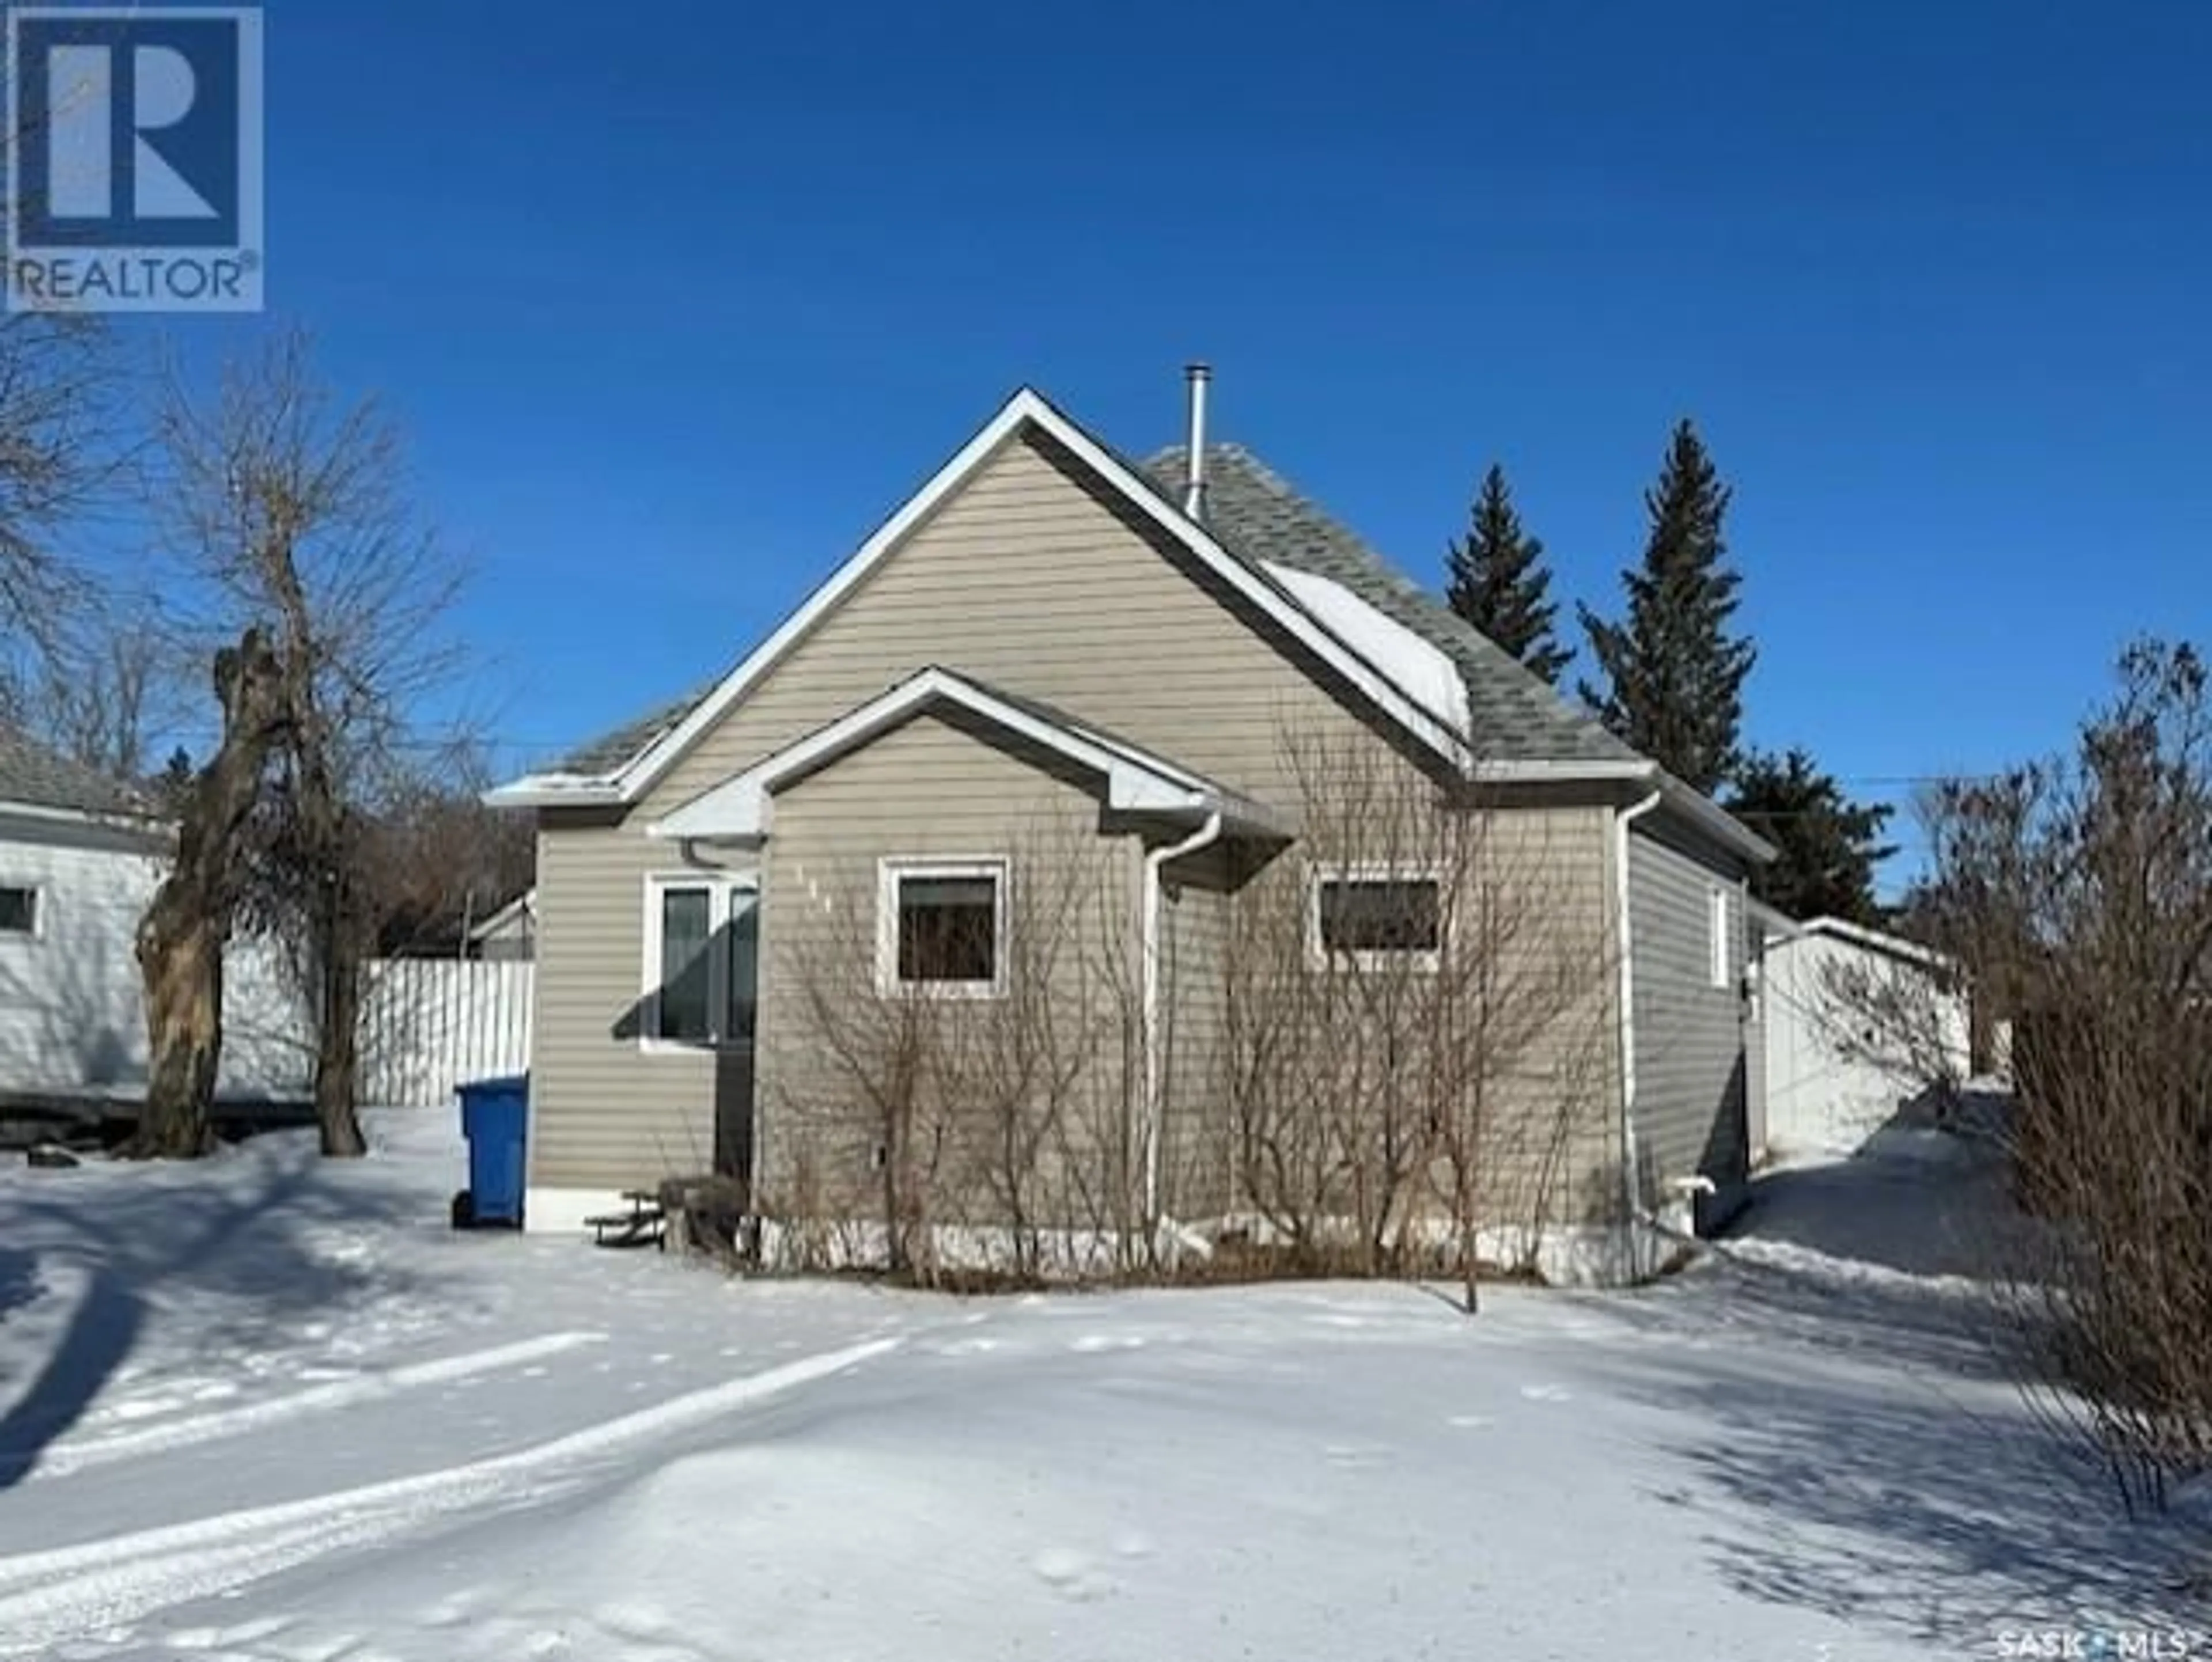 Home with unknown exterior material for 344 5th AVENUE E, Melville Saskatchewan S0A2P0